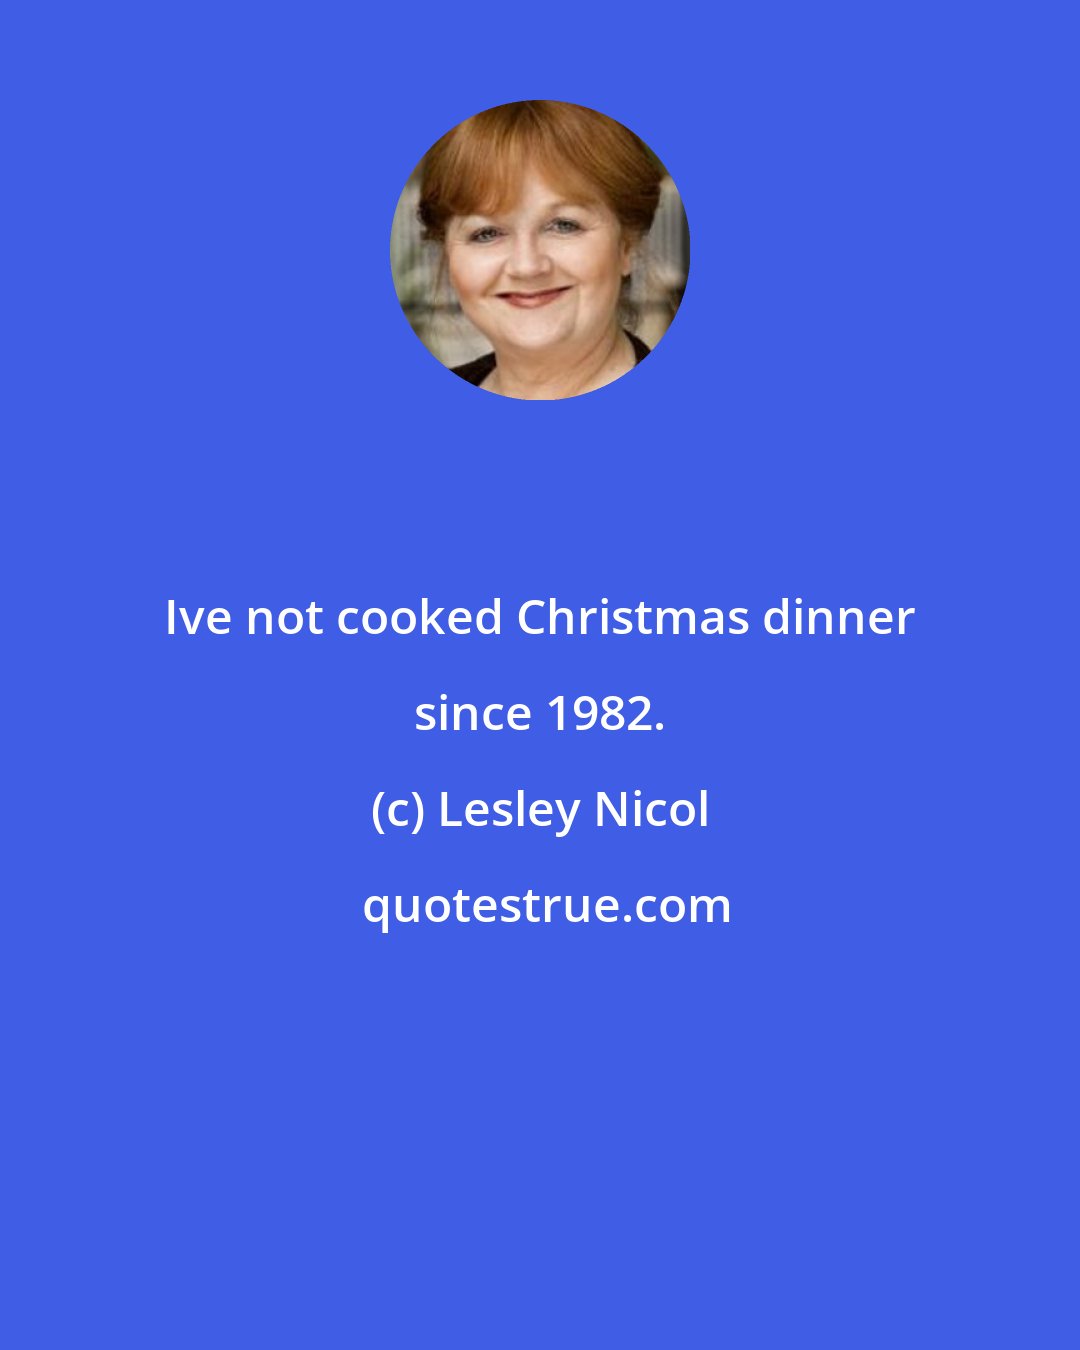 Lesley Nicol: Ive not cooked Christmas dinner since 1982.